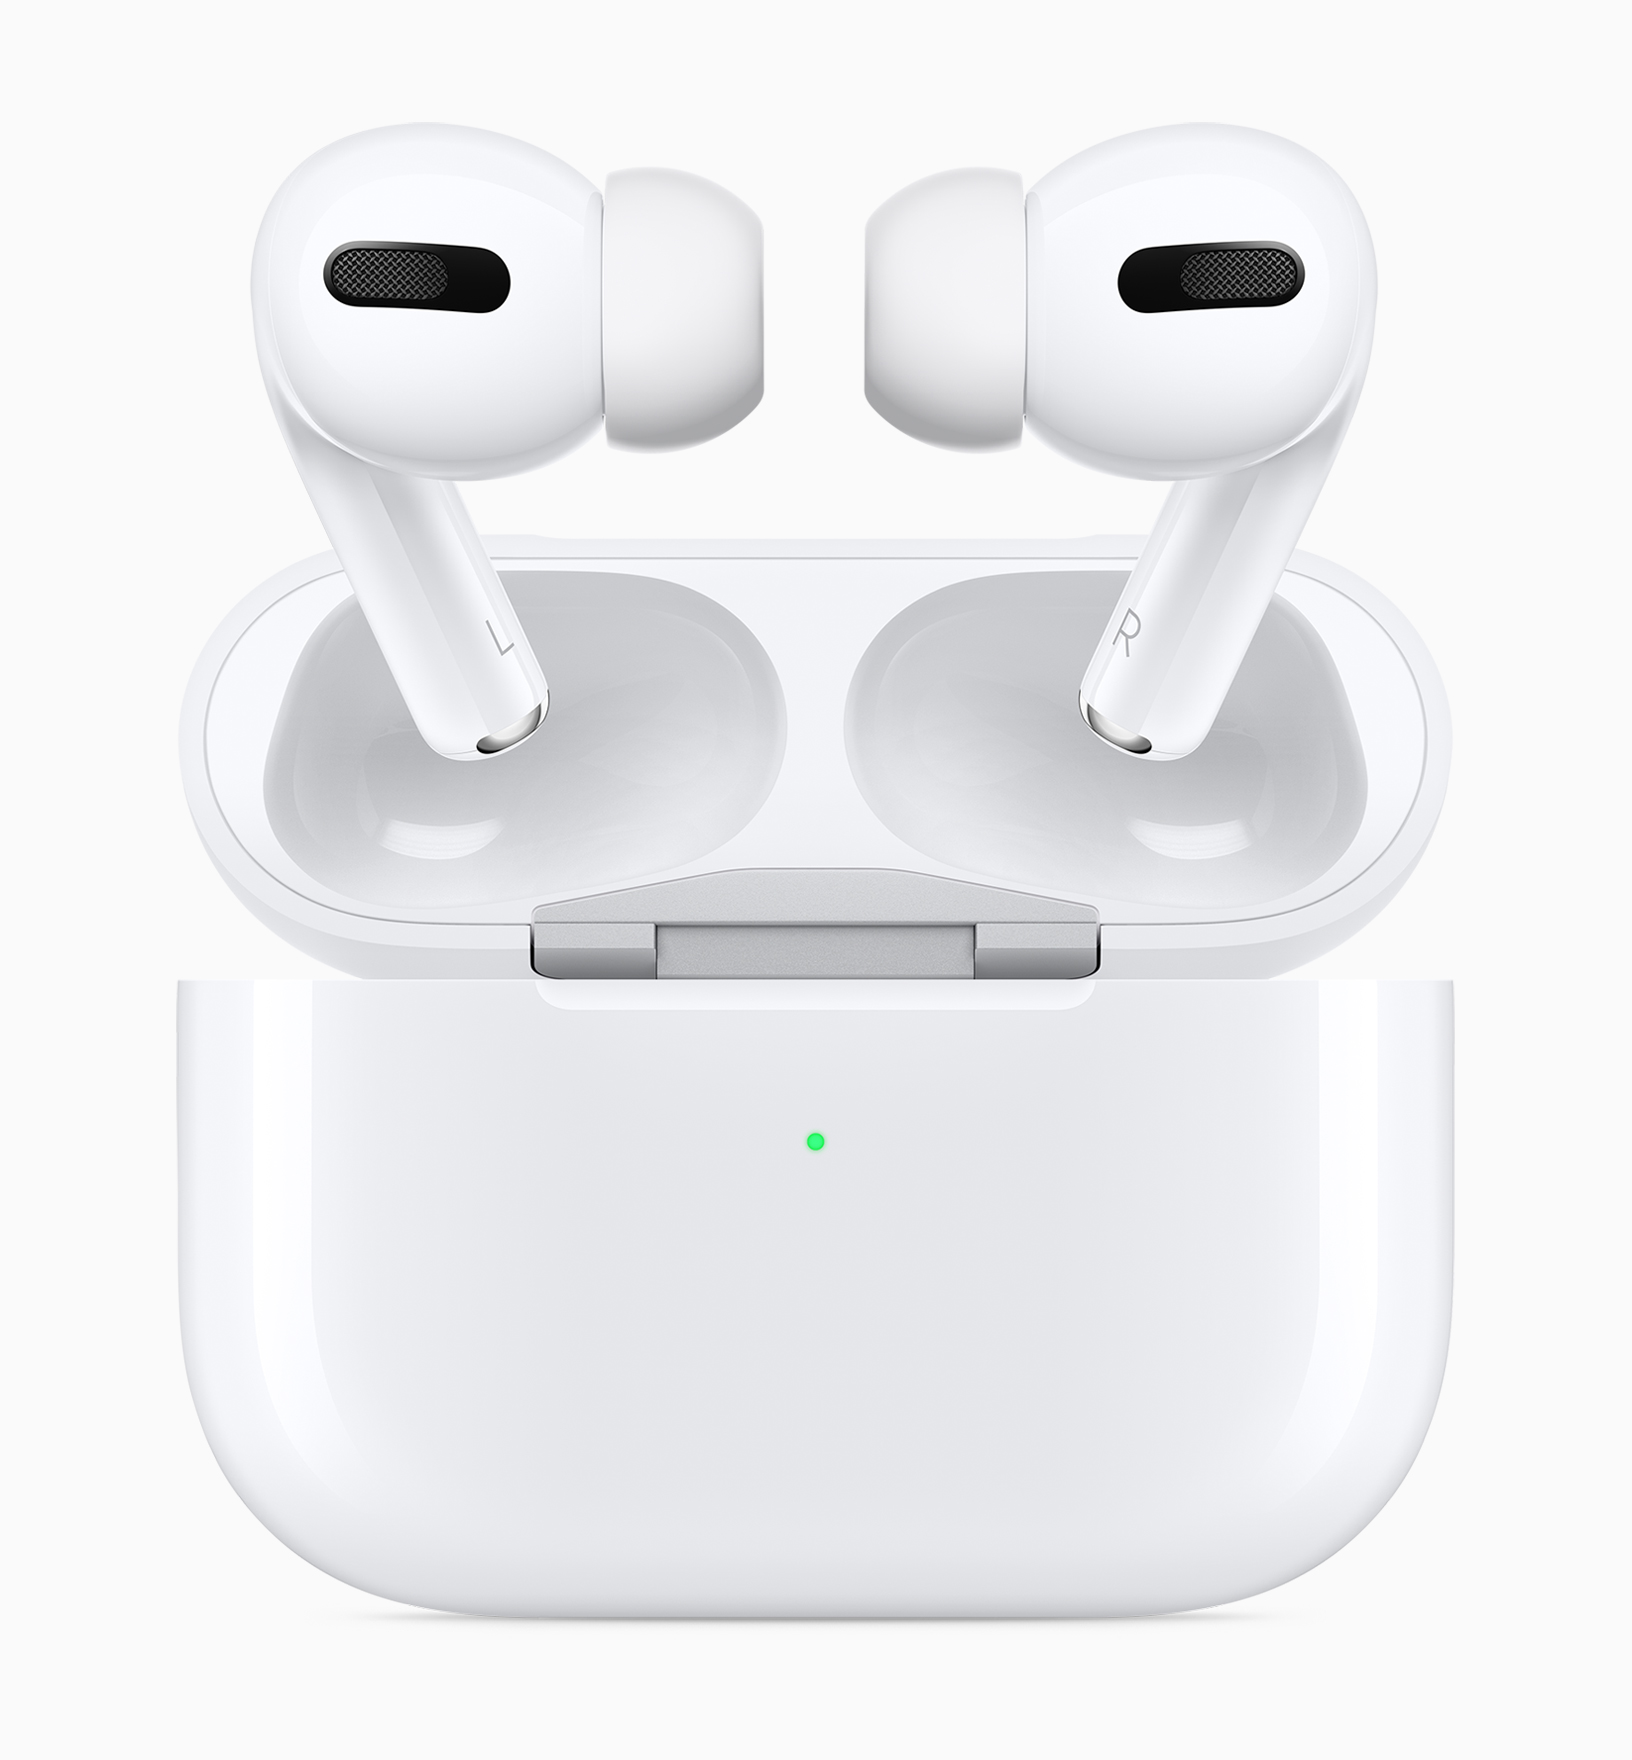 Apple_AirPods-Pro_New-Design-case-and-airpods-pro_102819_big.jpg.large_2x.jpg